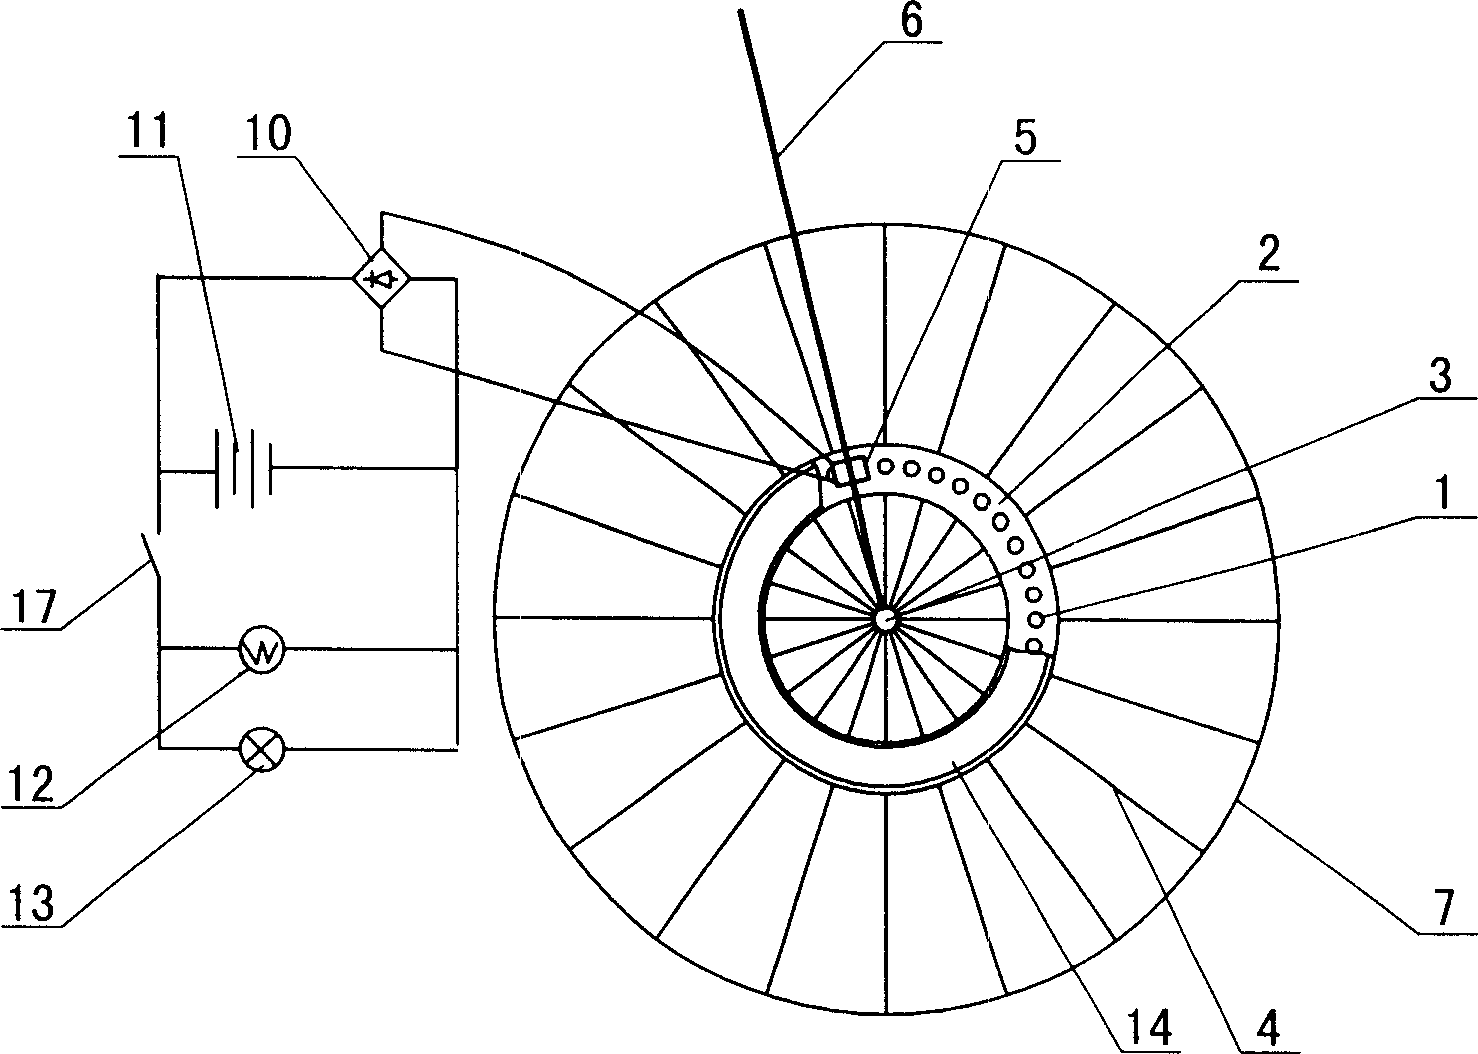 Bicycle power generating device and complete lamp and bell